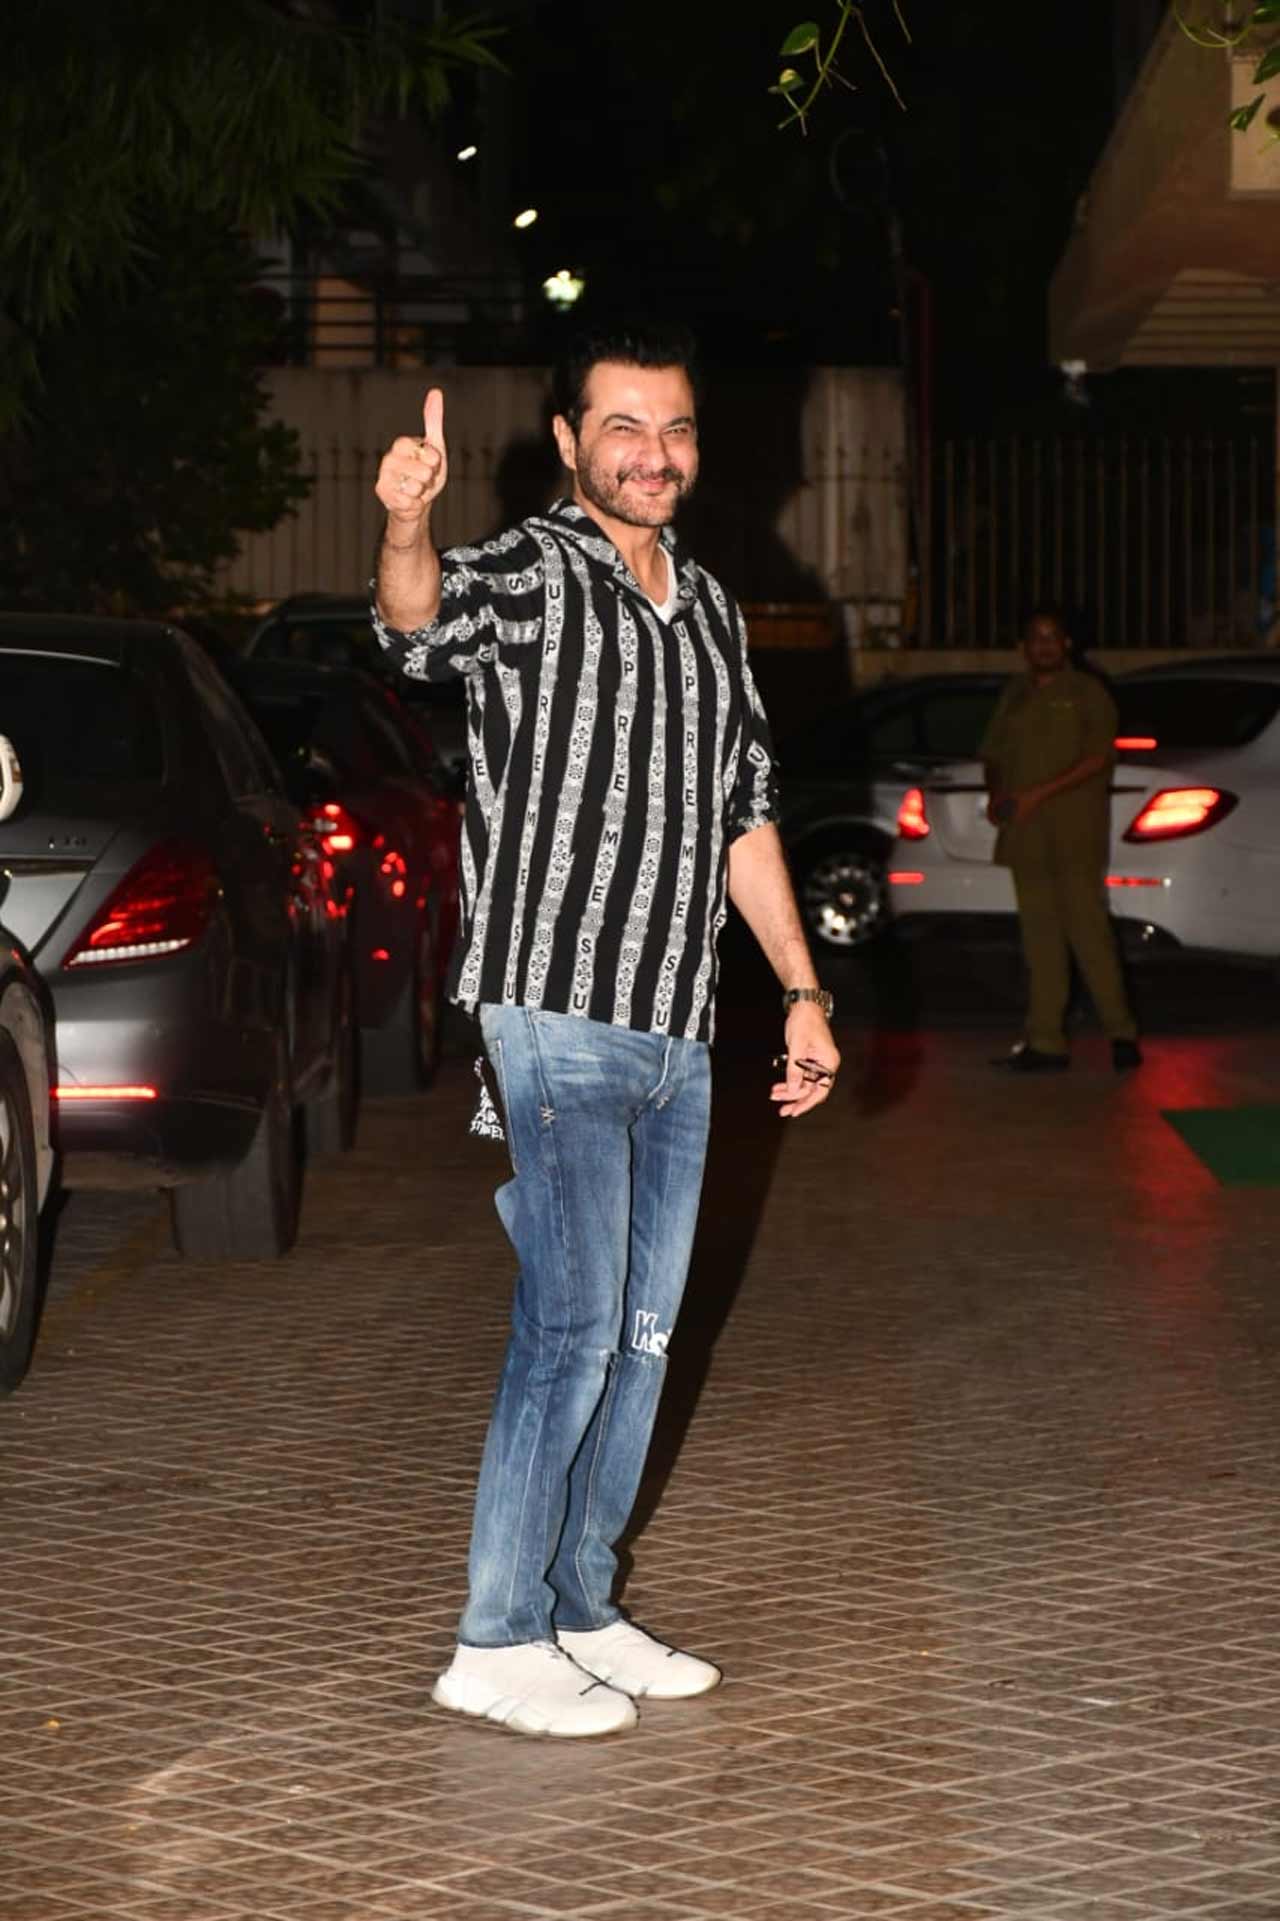 Sanjay Kapoor was seen wearing a striped shirt paired with a basic pair of denim during the outing.